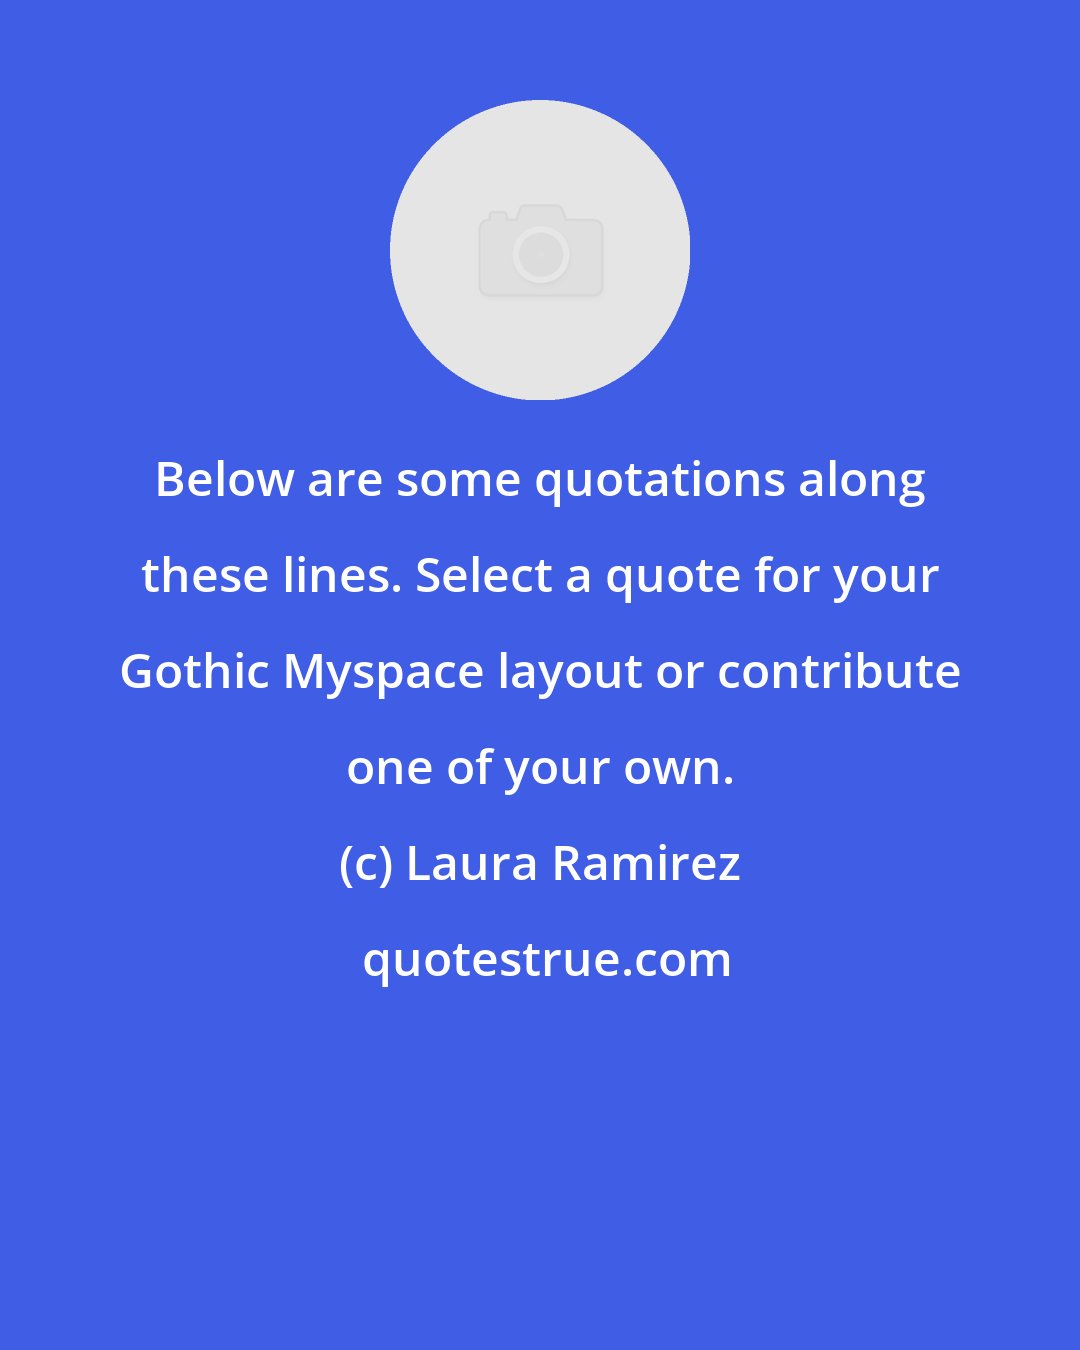 Laura Ramirez: Below are some quotations along these lines. Select a quote for your Gothic Myspace layout or contribute one of your own.